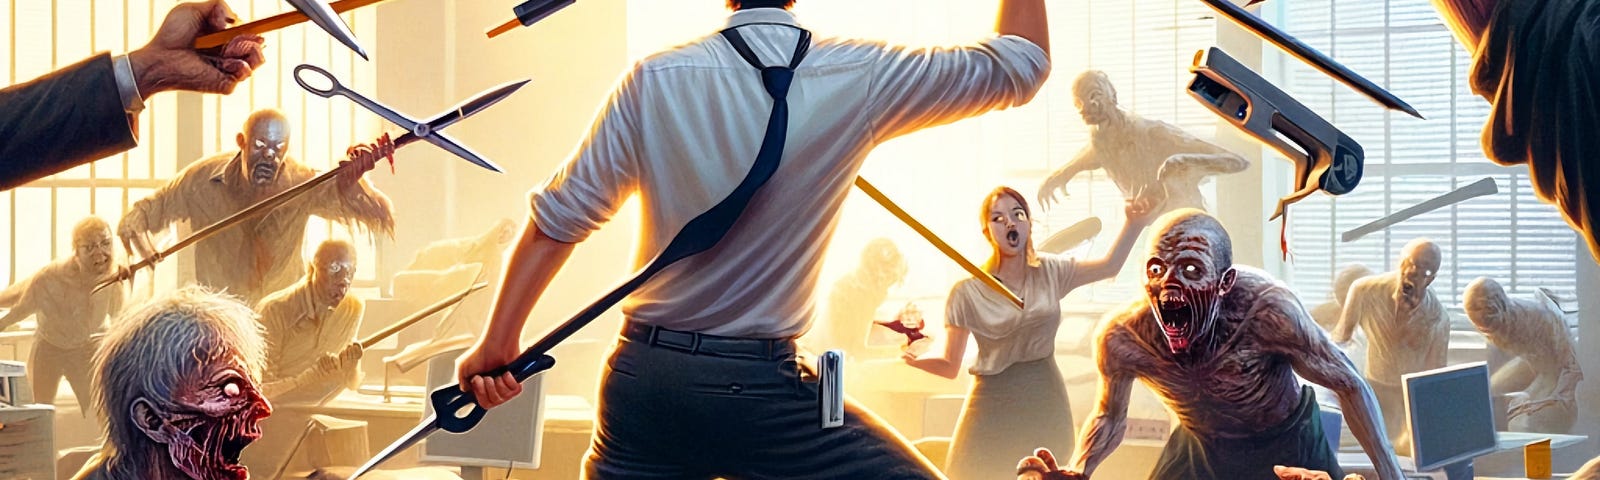 Man in business attire battles zombies with office supplies